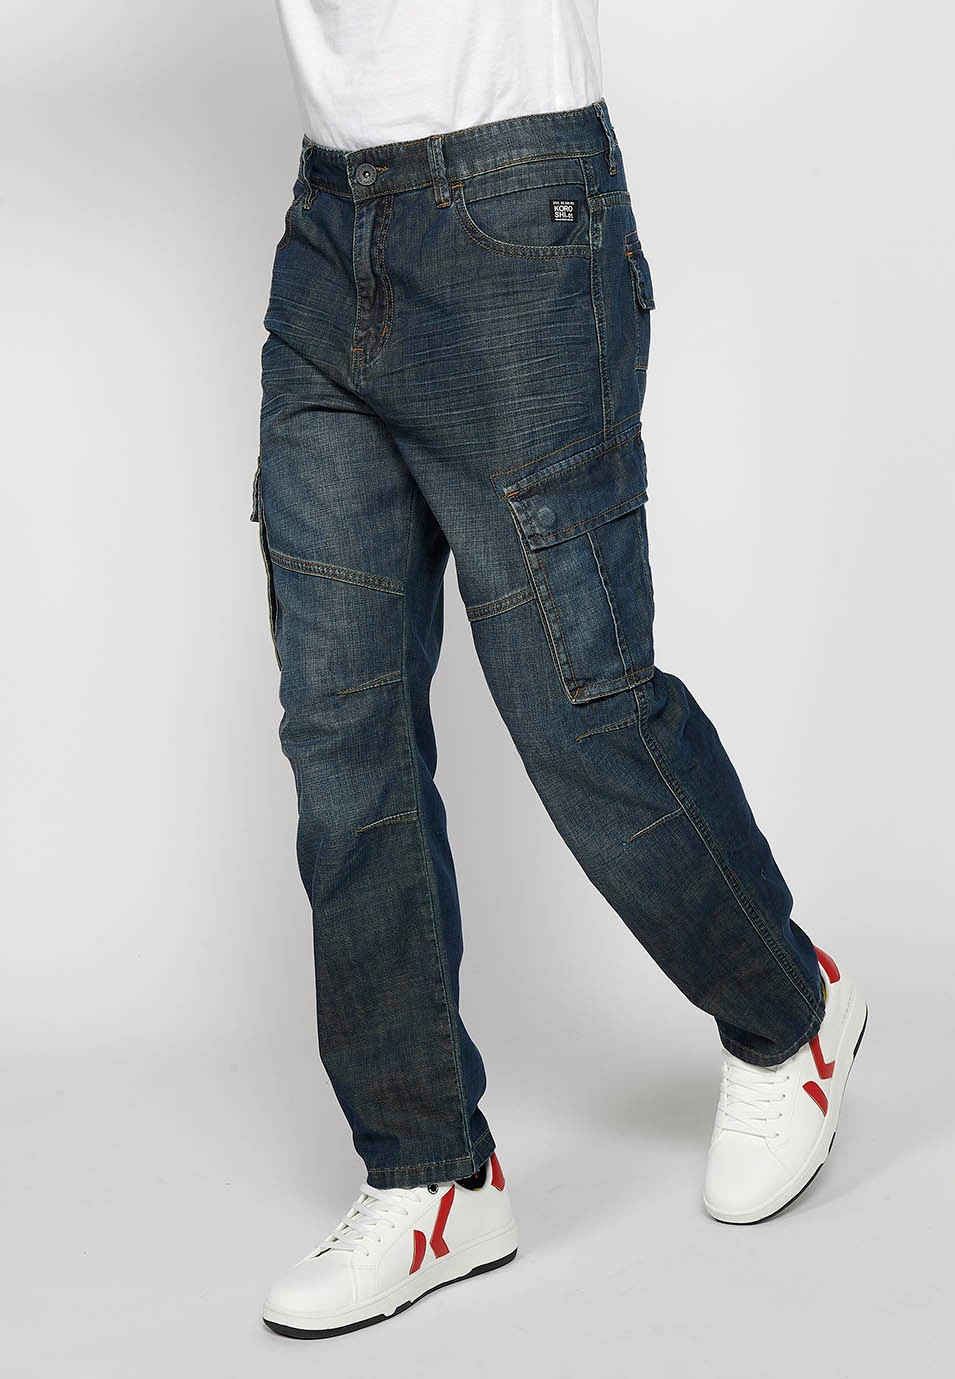 Long Cargo Pants with Front Zipper and Button Closure with Side Flap Pockets in Dark Blue for Men 3